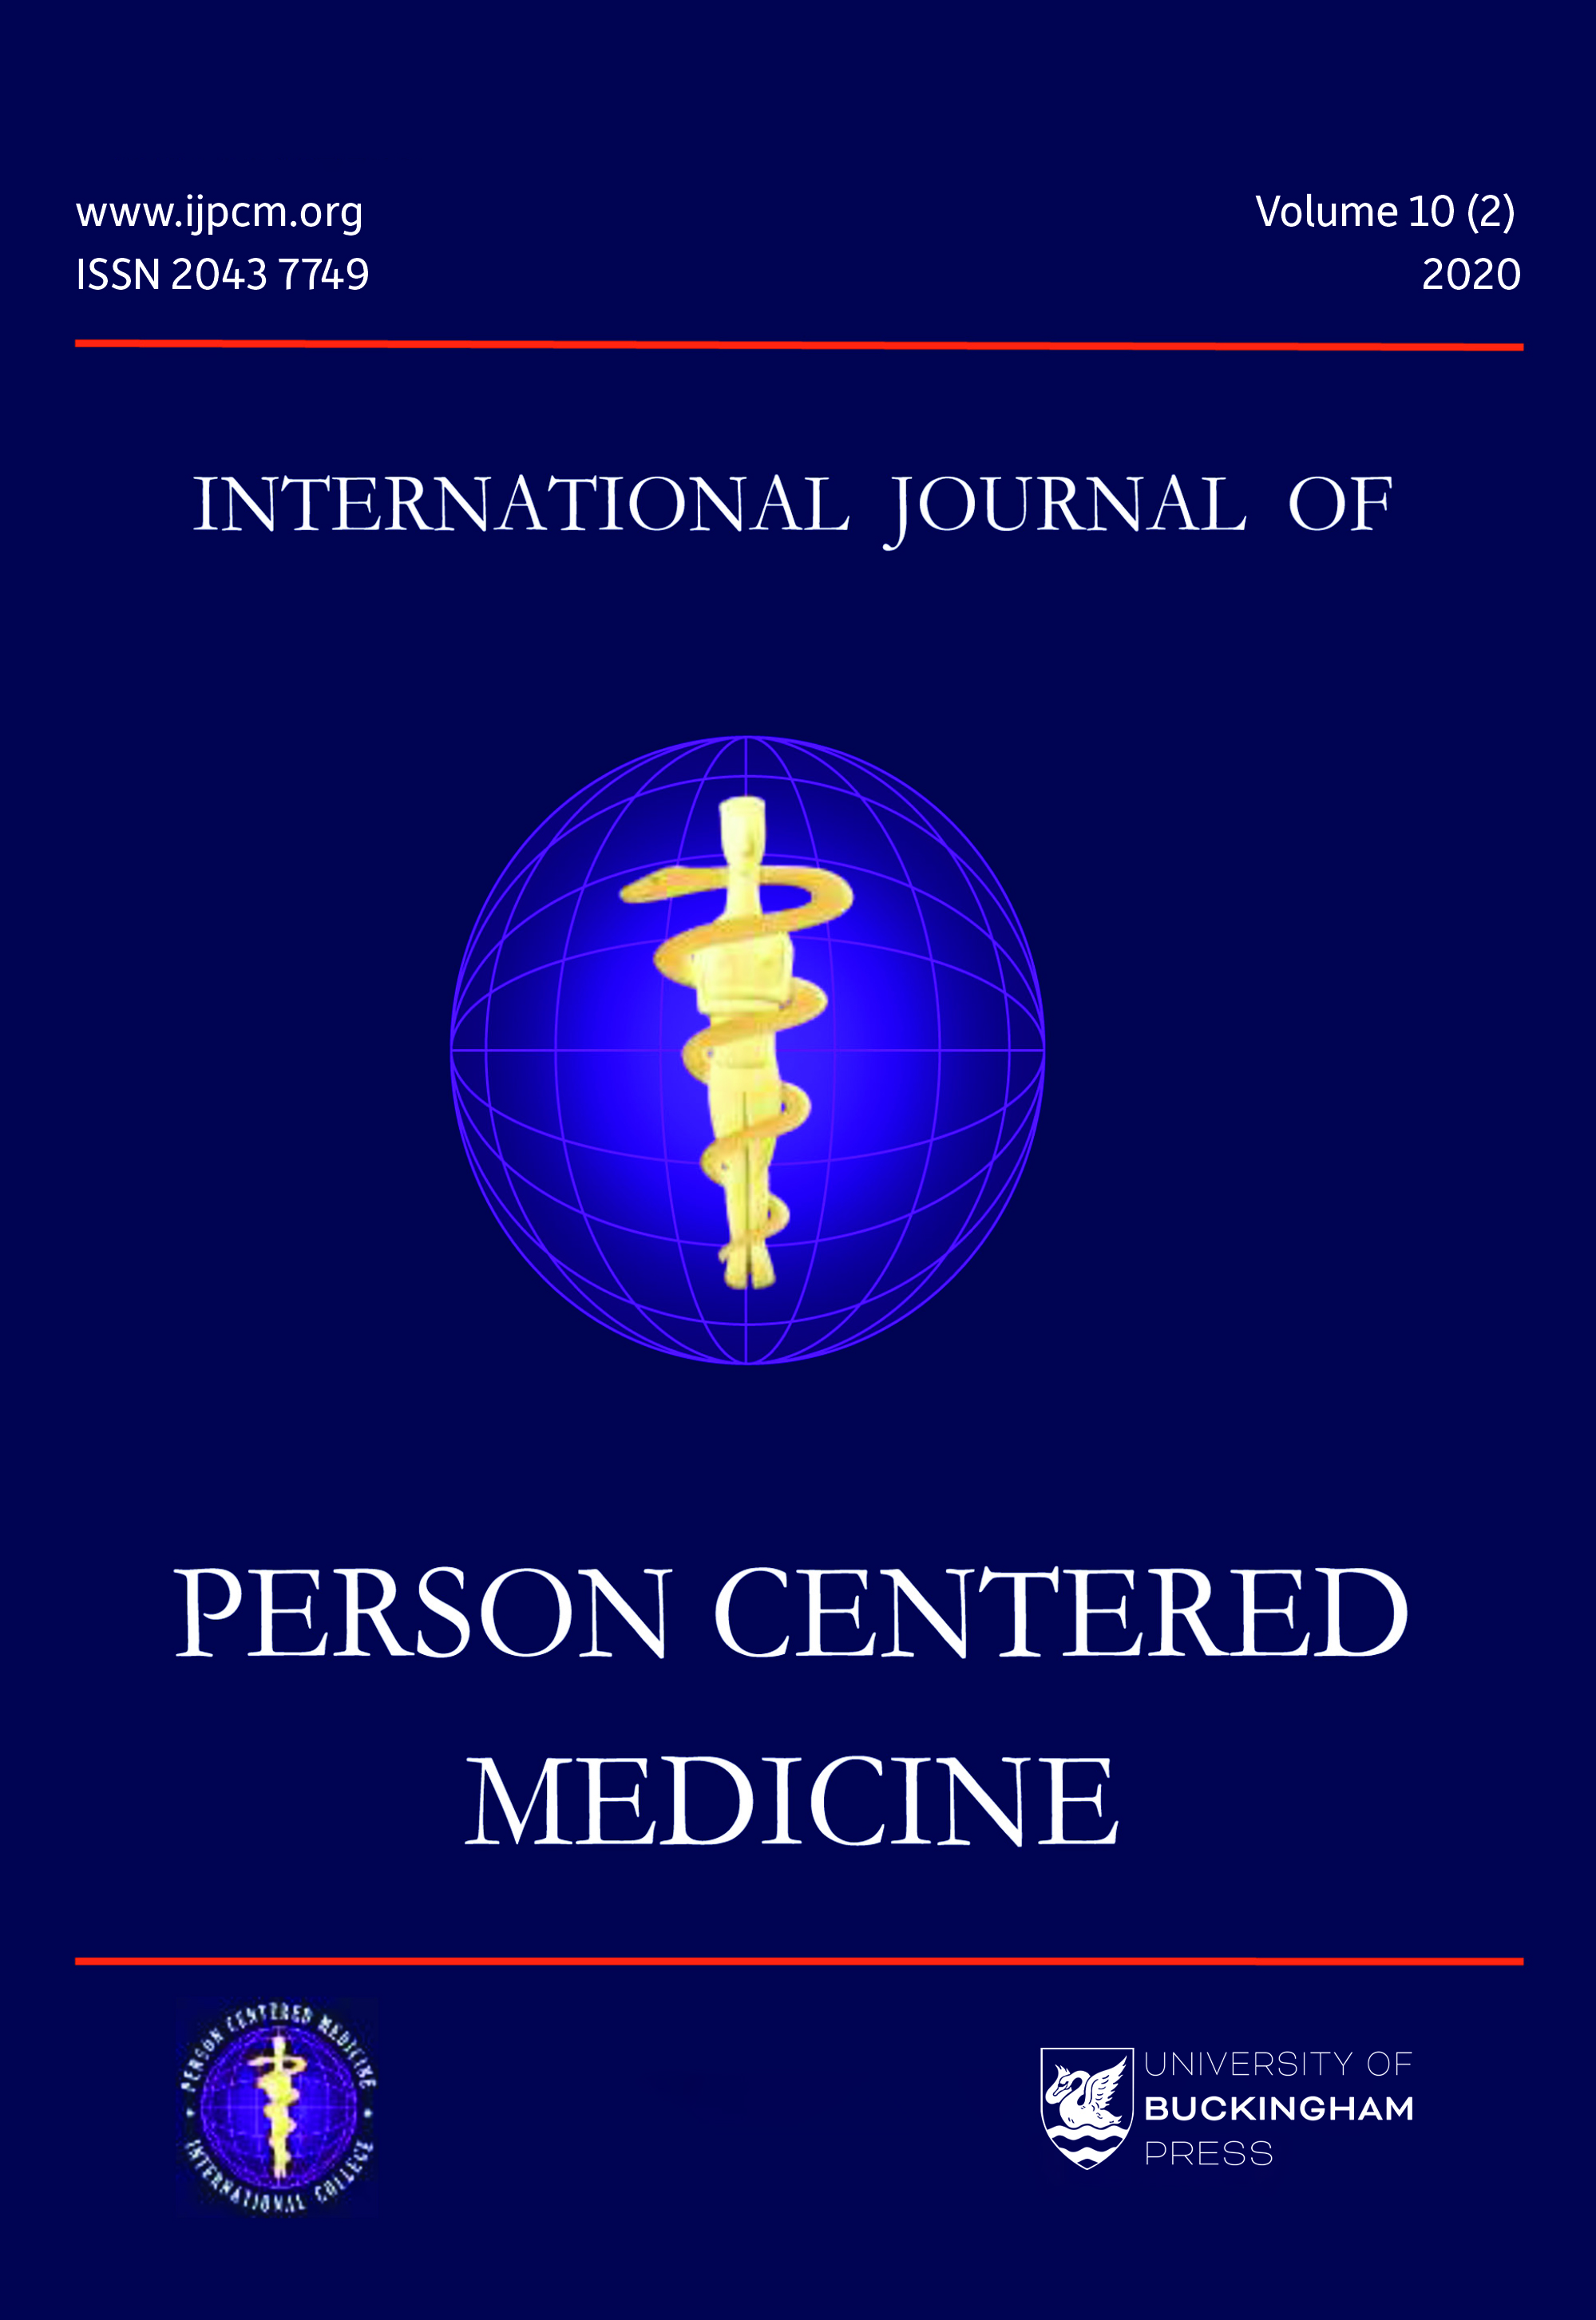 Archives | International Journal of Person Centered Medicine